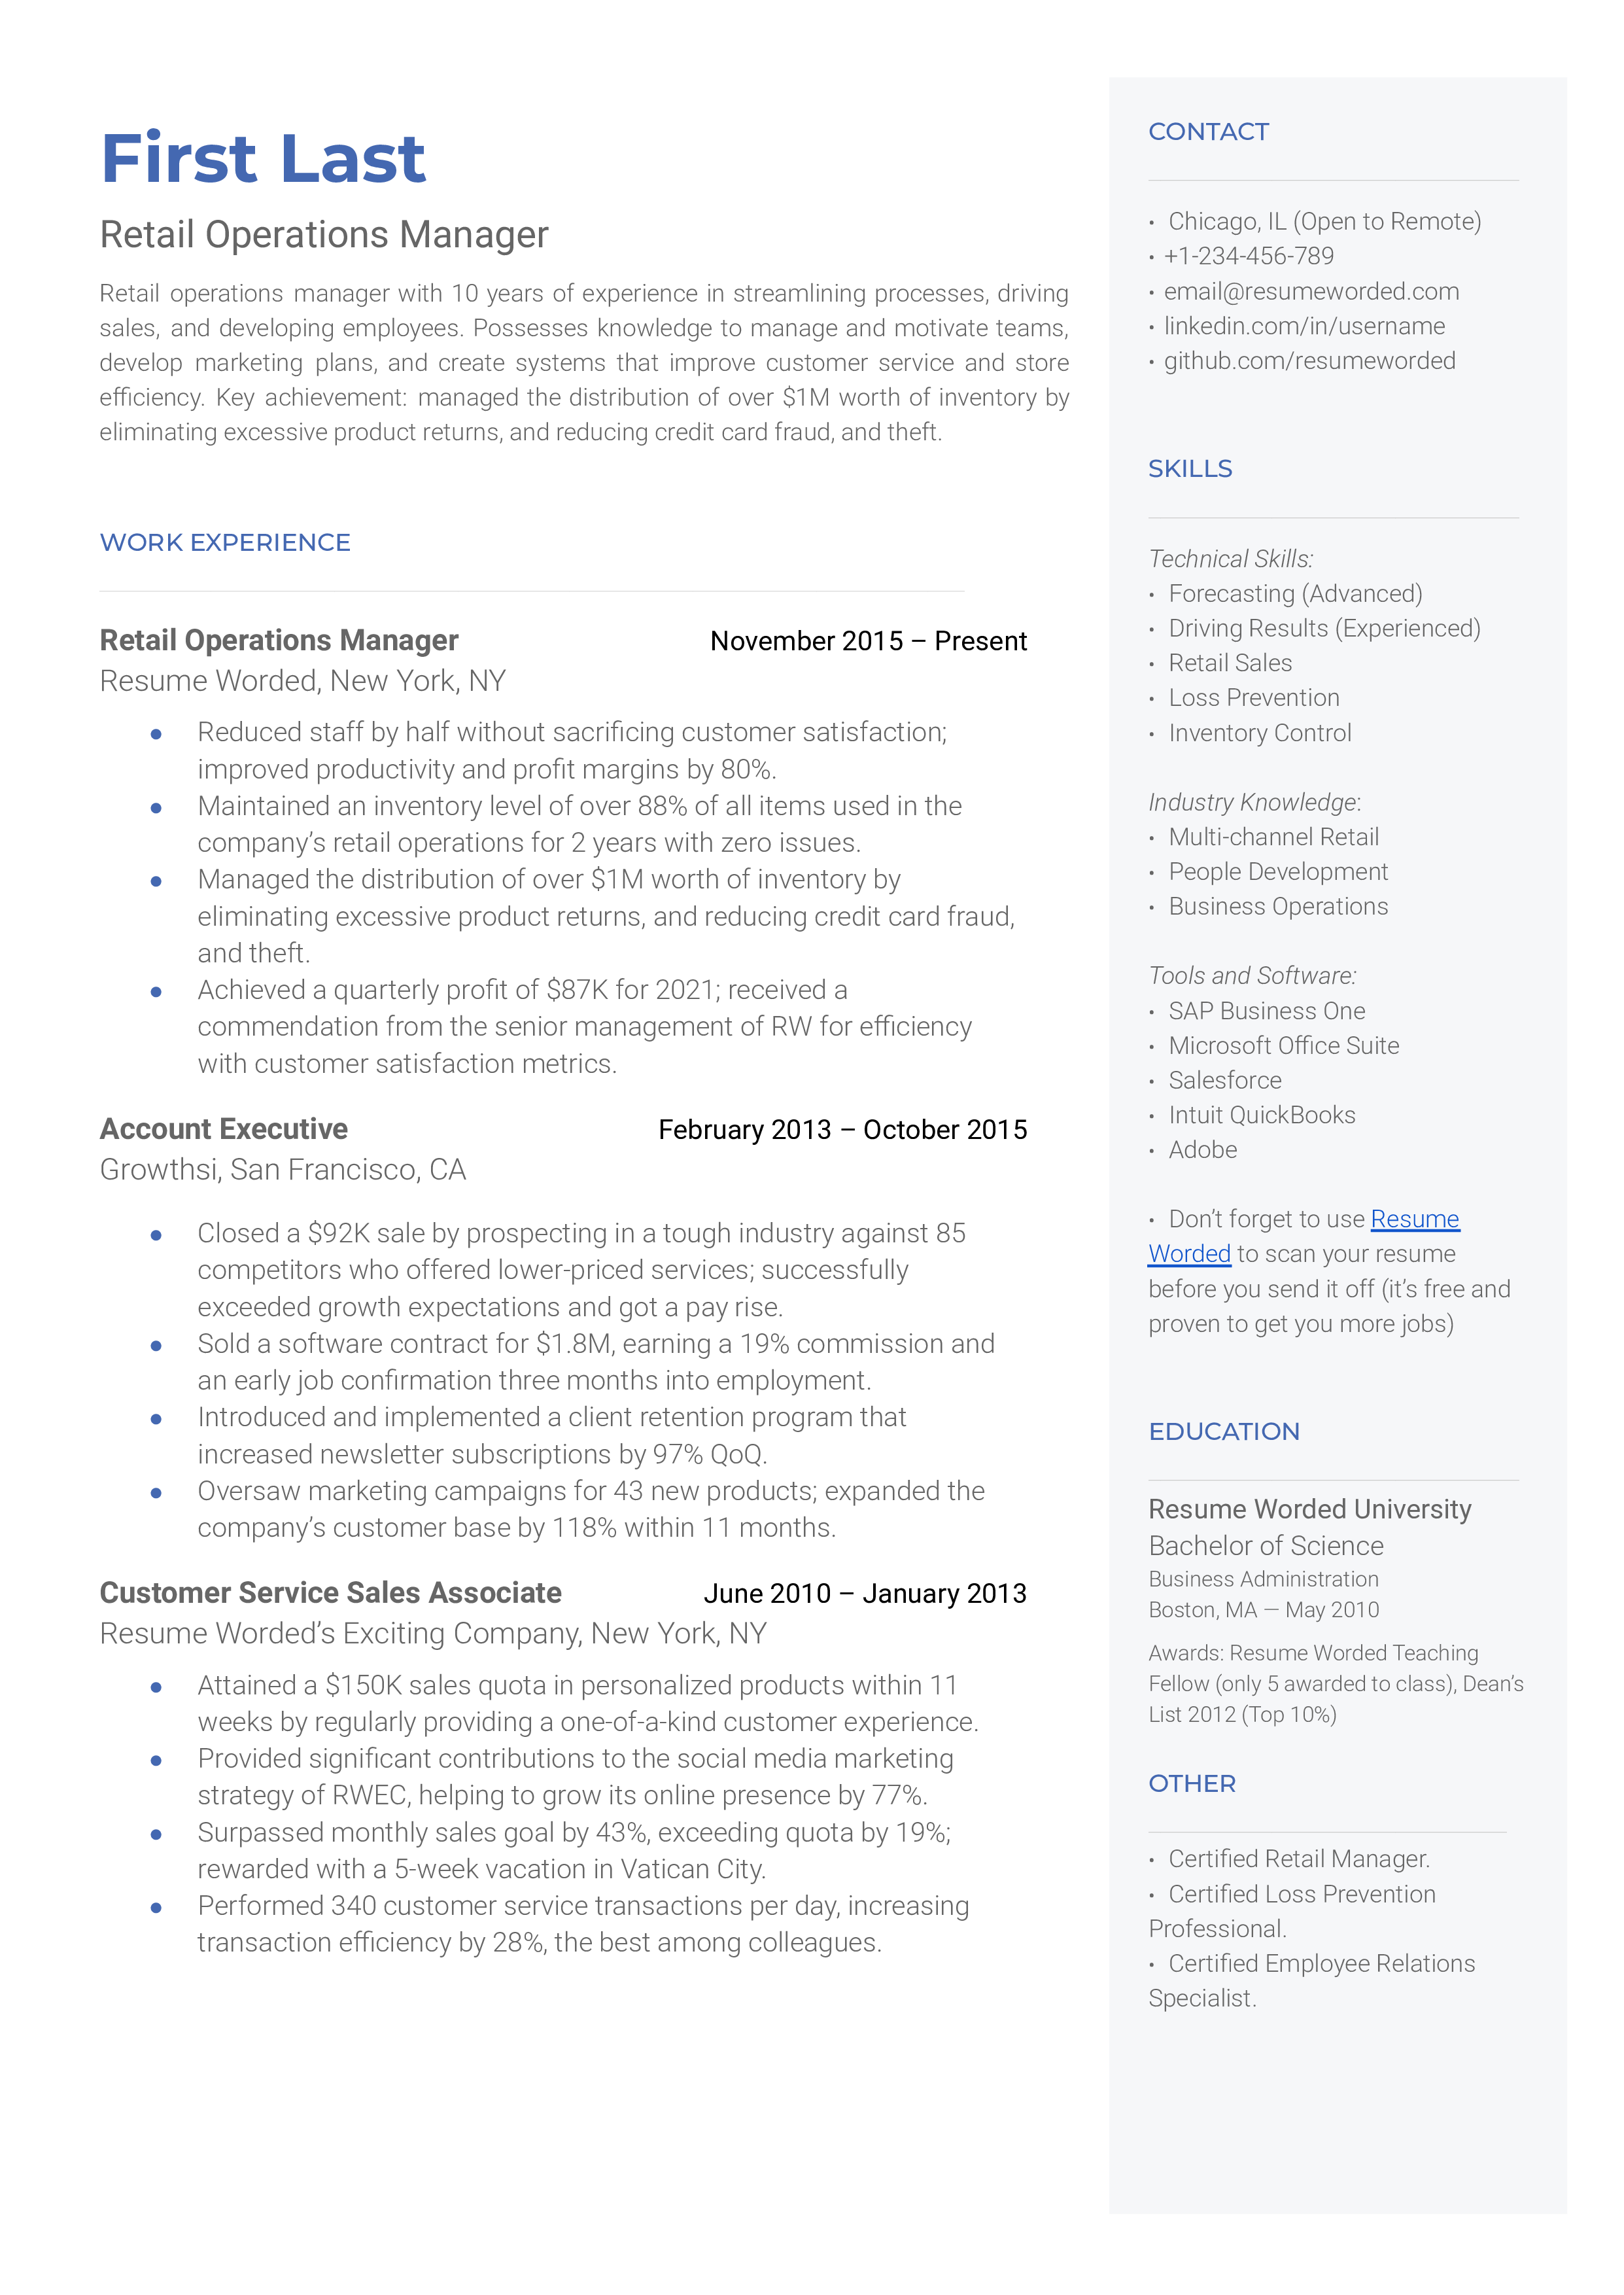 A retail operations manager resume sample that highlights the applicant's retail experience and operations achievements.